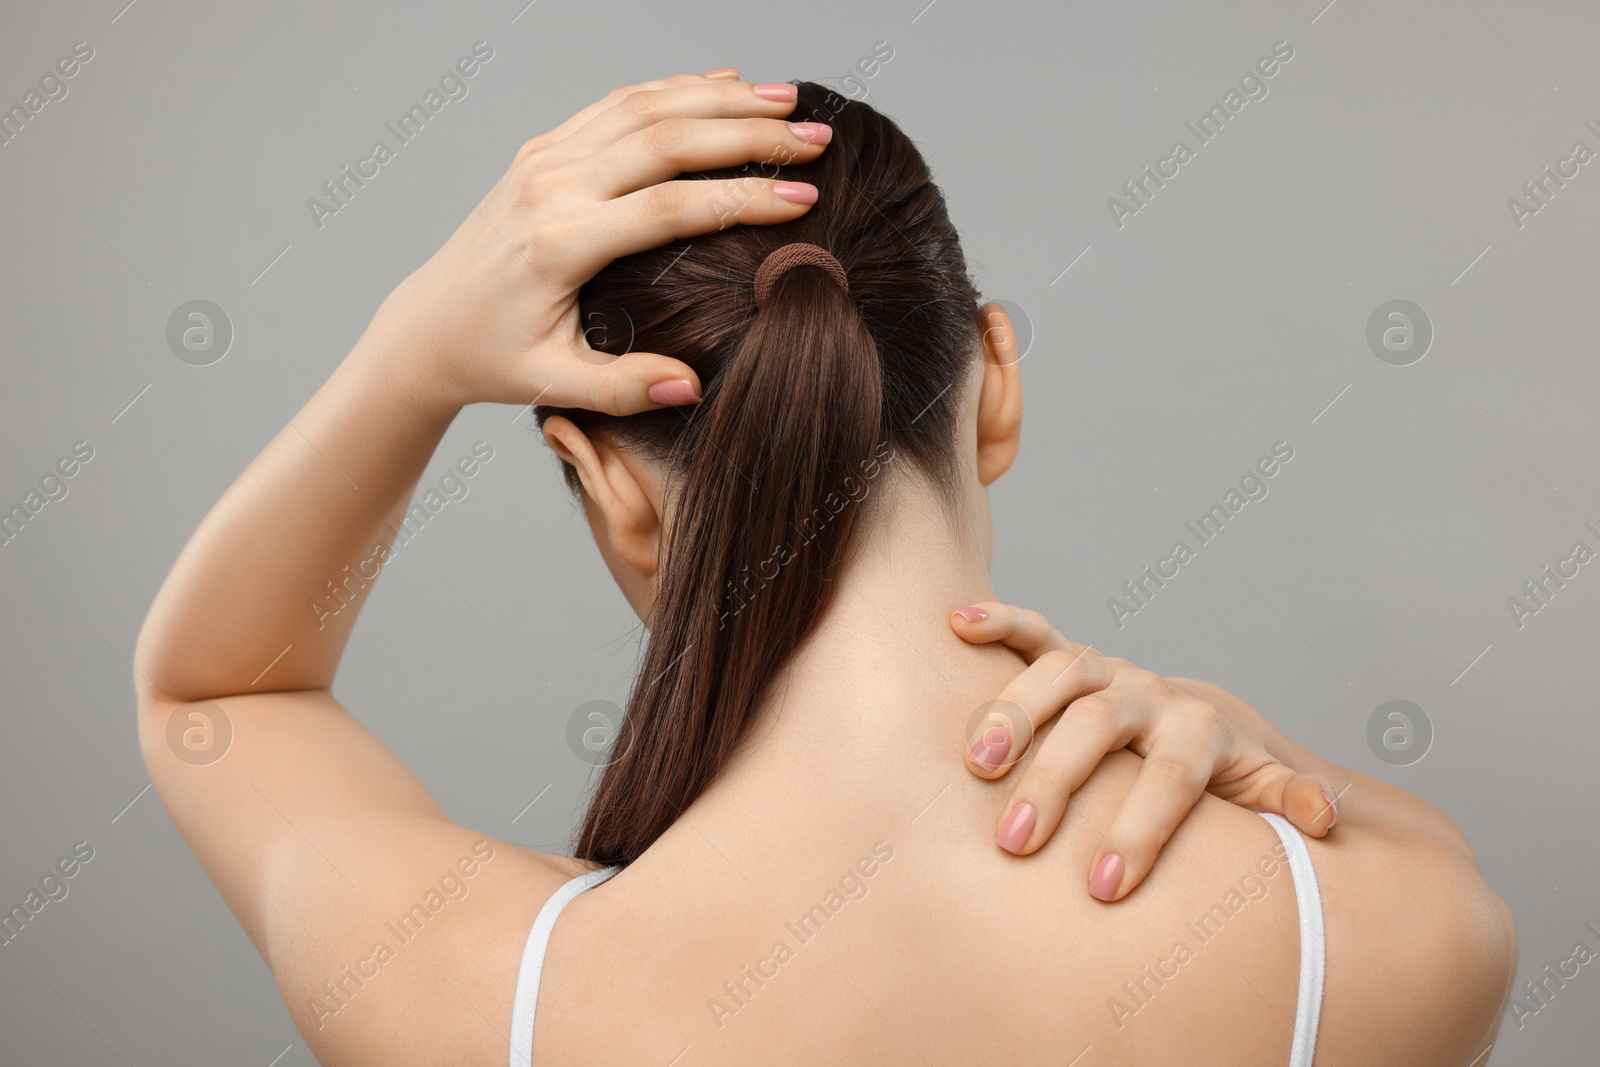 Photo of Woman touching her neck and head on grey background, back view